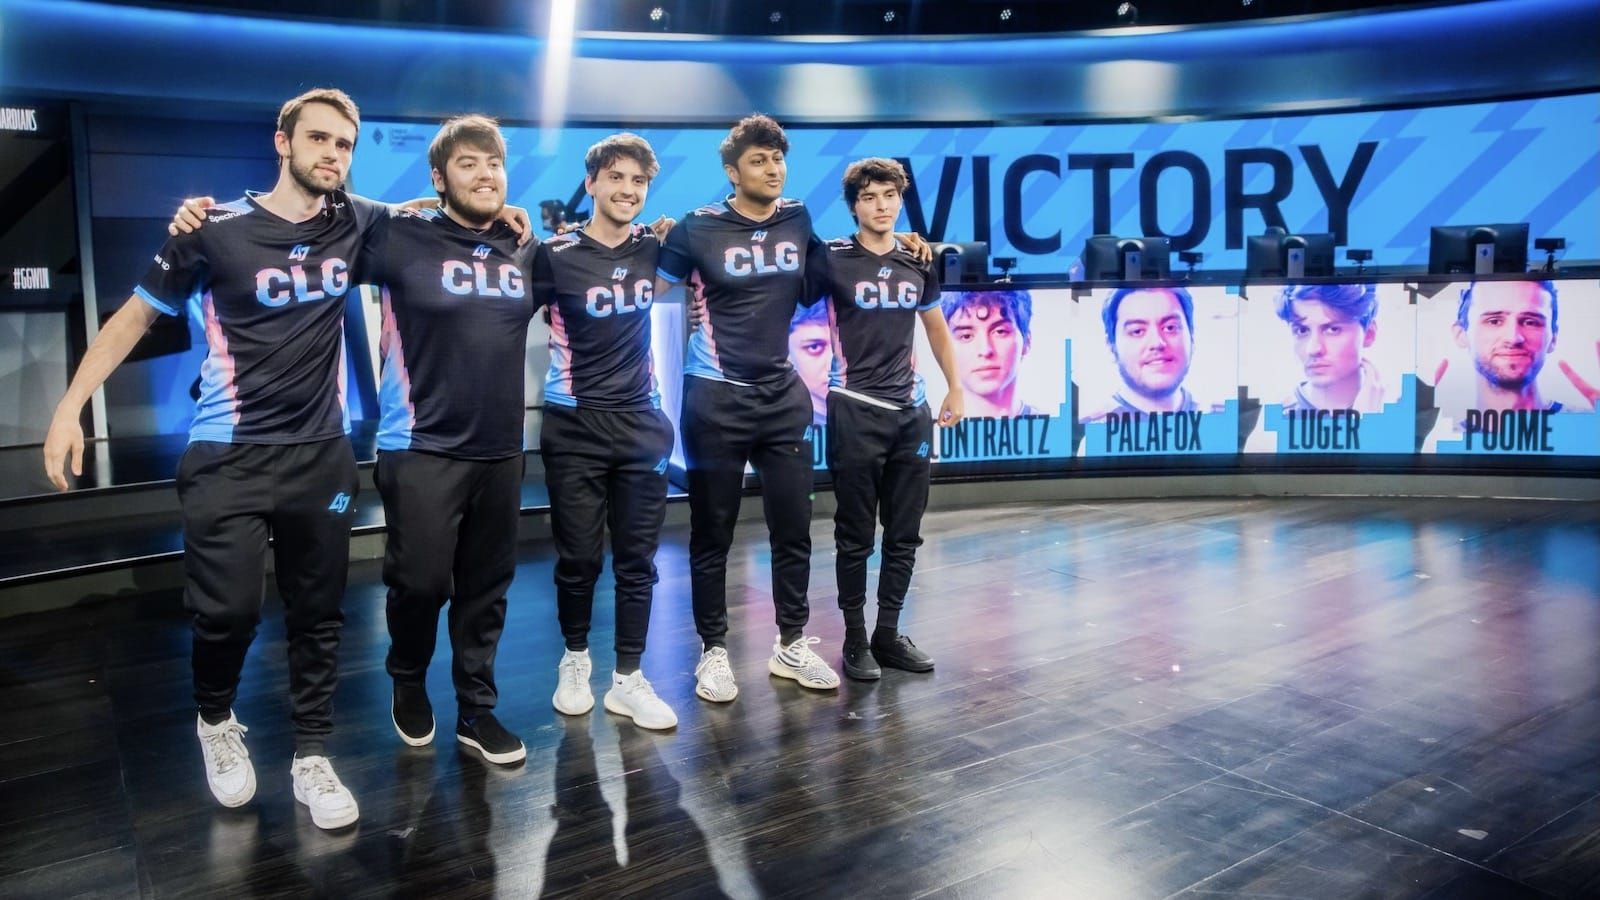 CLG League of Legends team stands on stage smiling after victory